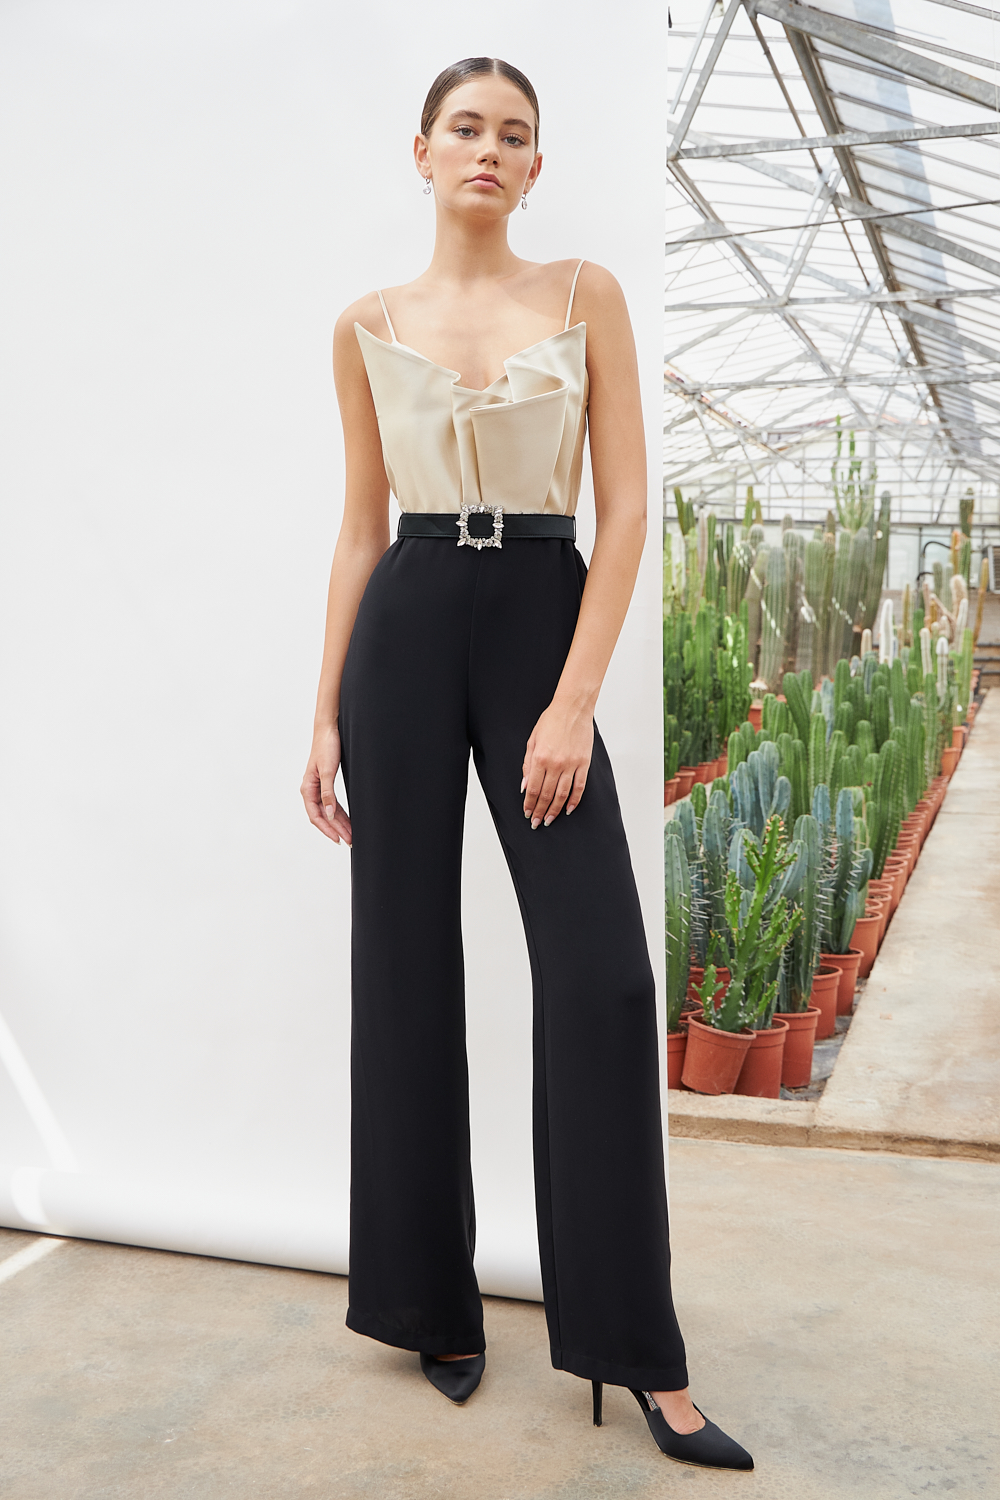 ROBERTA - Cocktail crepe jumpsuit with satin top, straps and belt